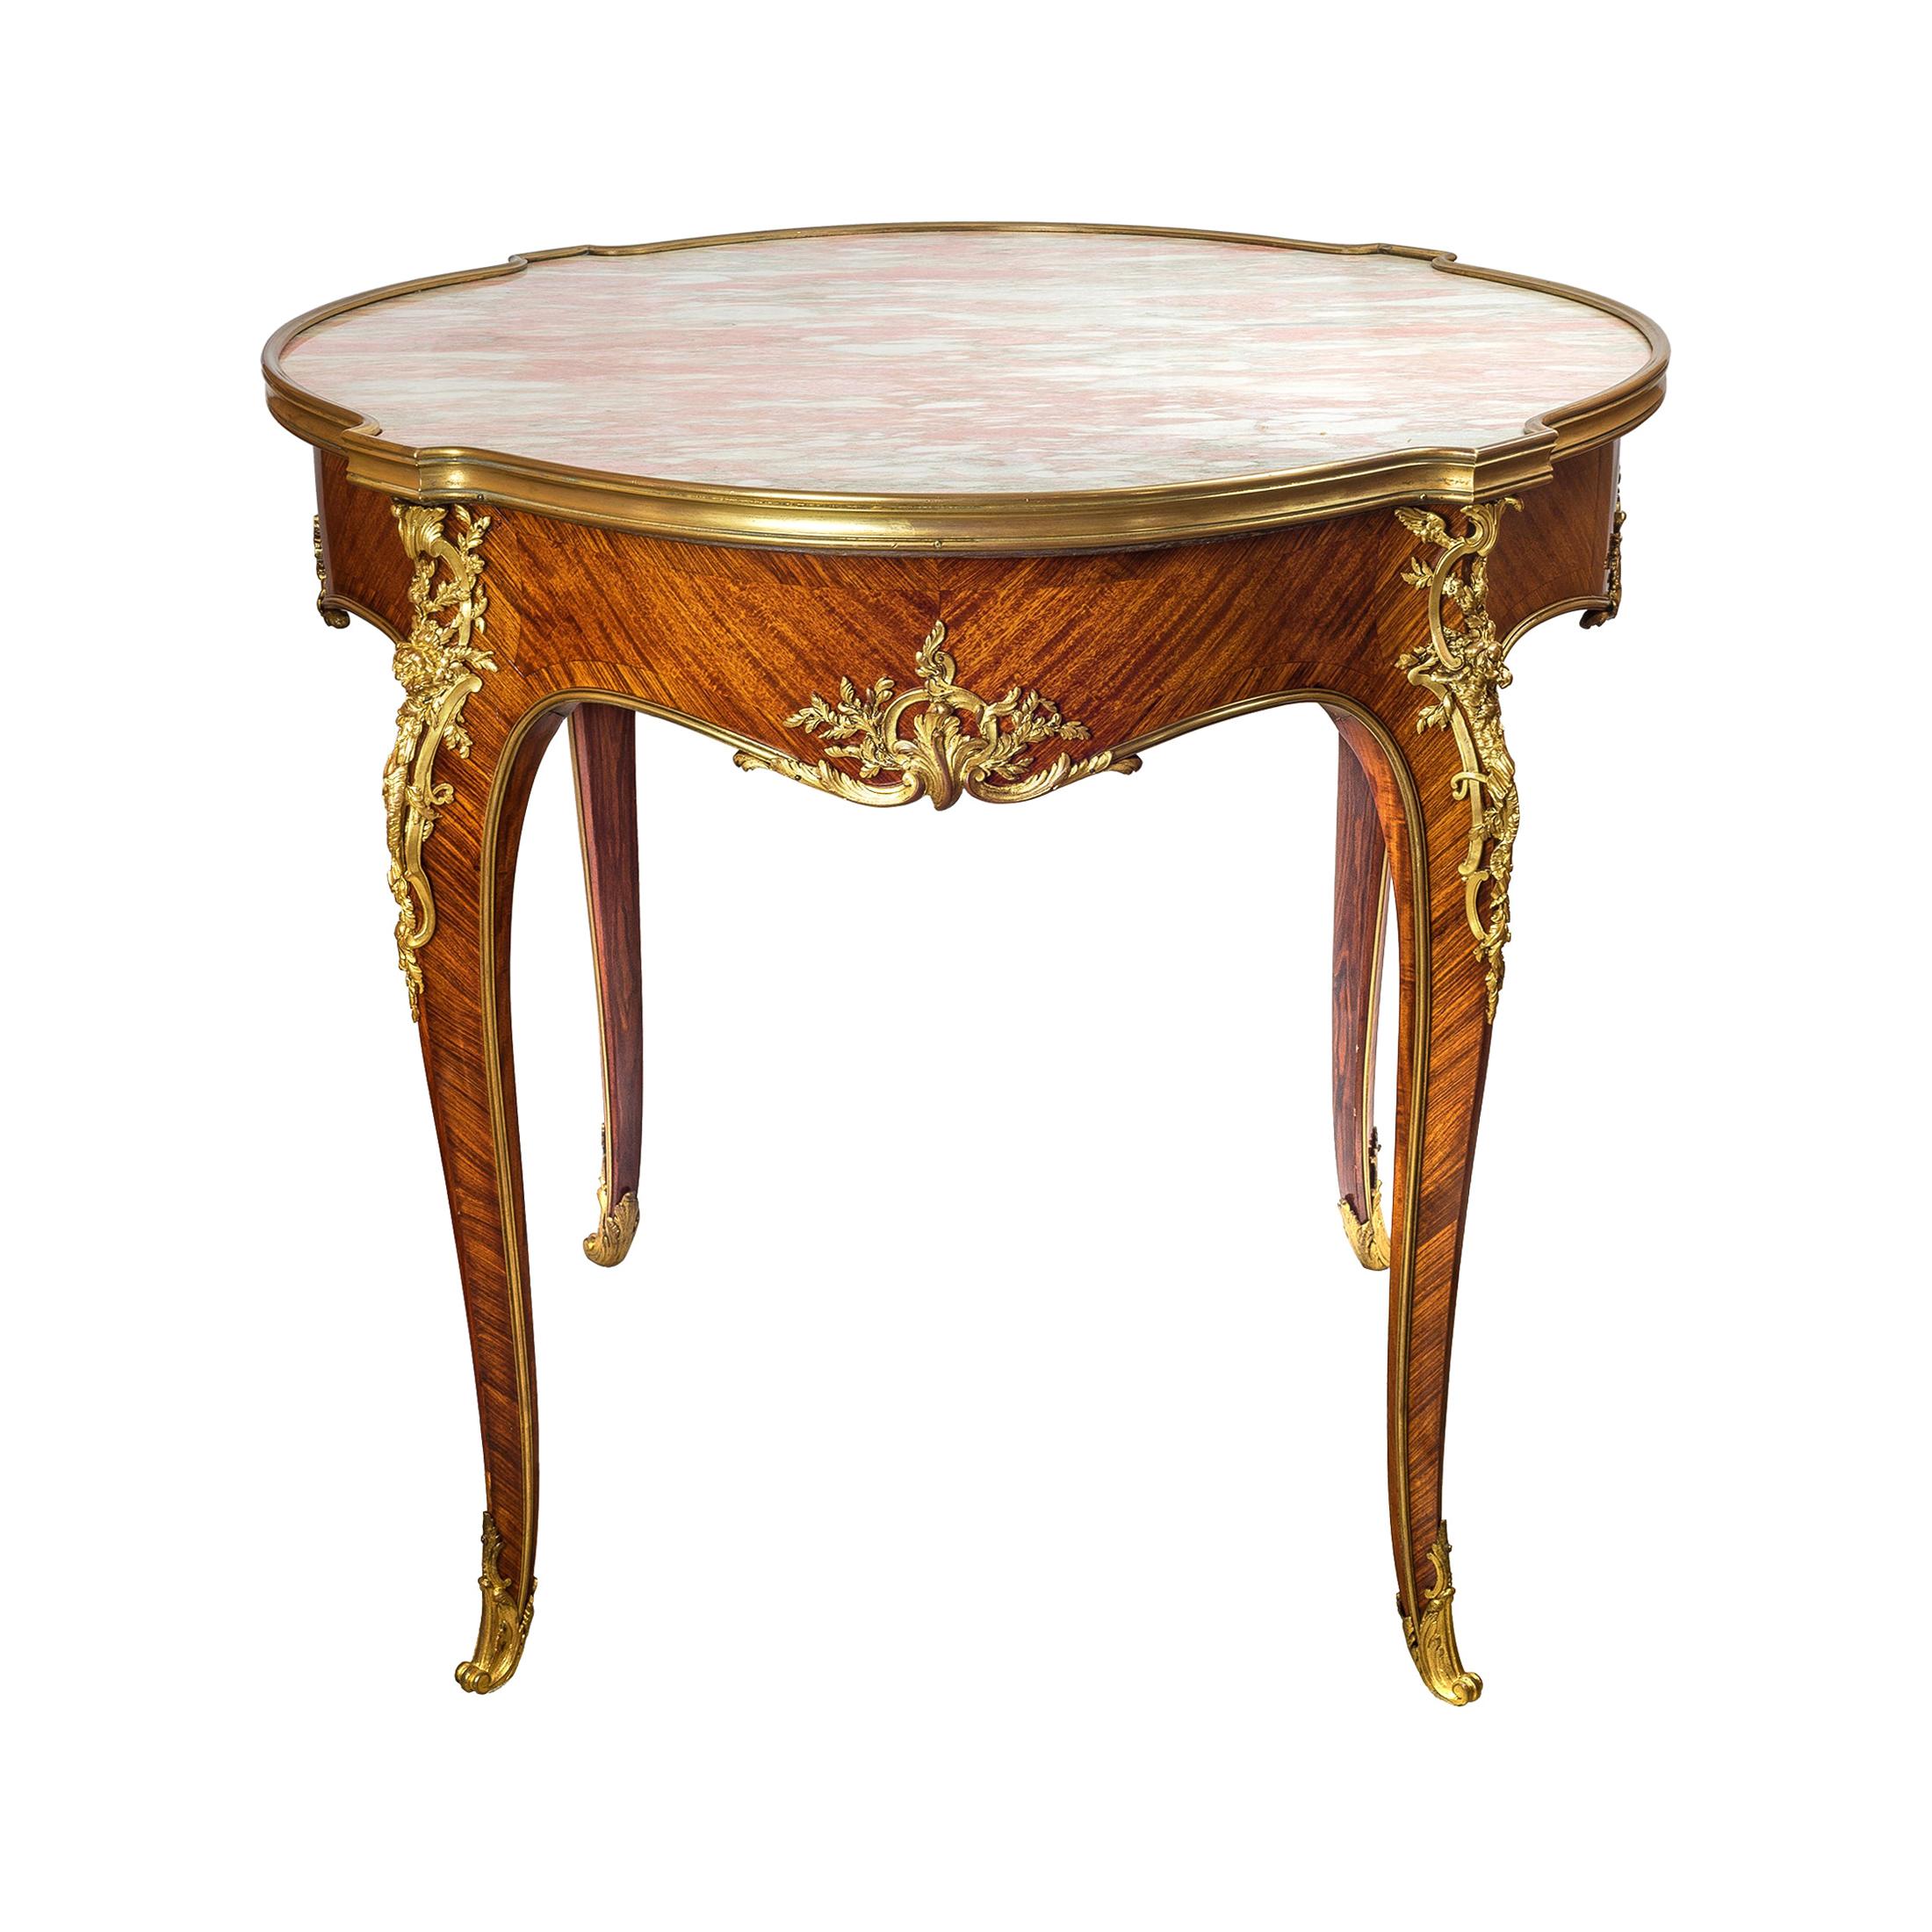 Louis XV-Style Ormolu-Mounted Marble-Top Center Table by Zwiener For Sale